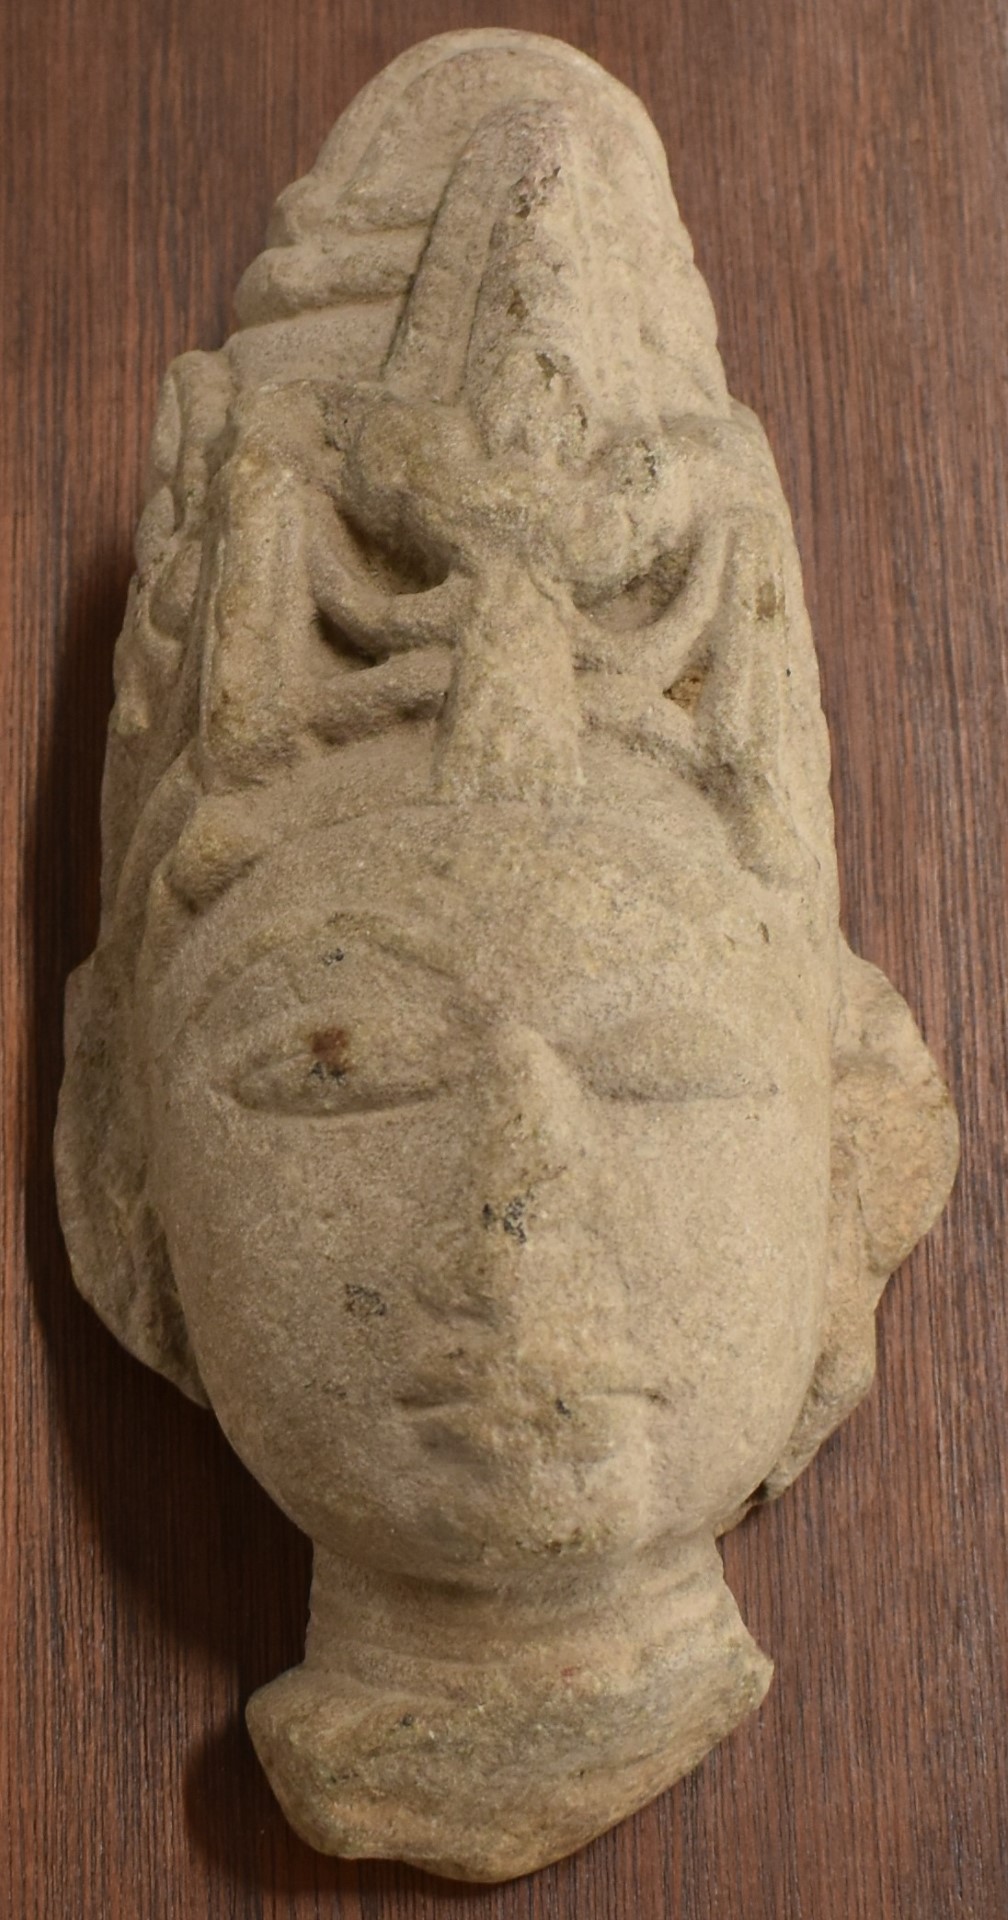 Carved stone Buddha mounted on a hardwood plaque, H23cm, the plaque 43 x 28.5cm - Image 2 of 2